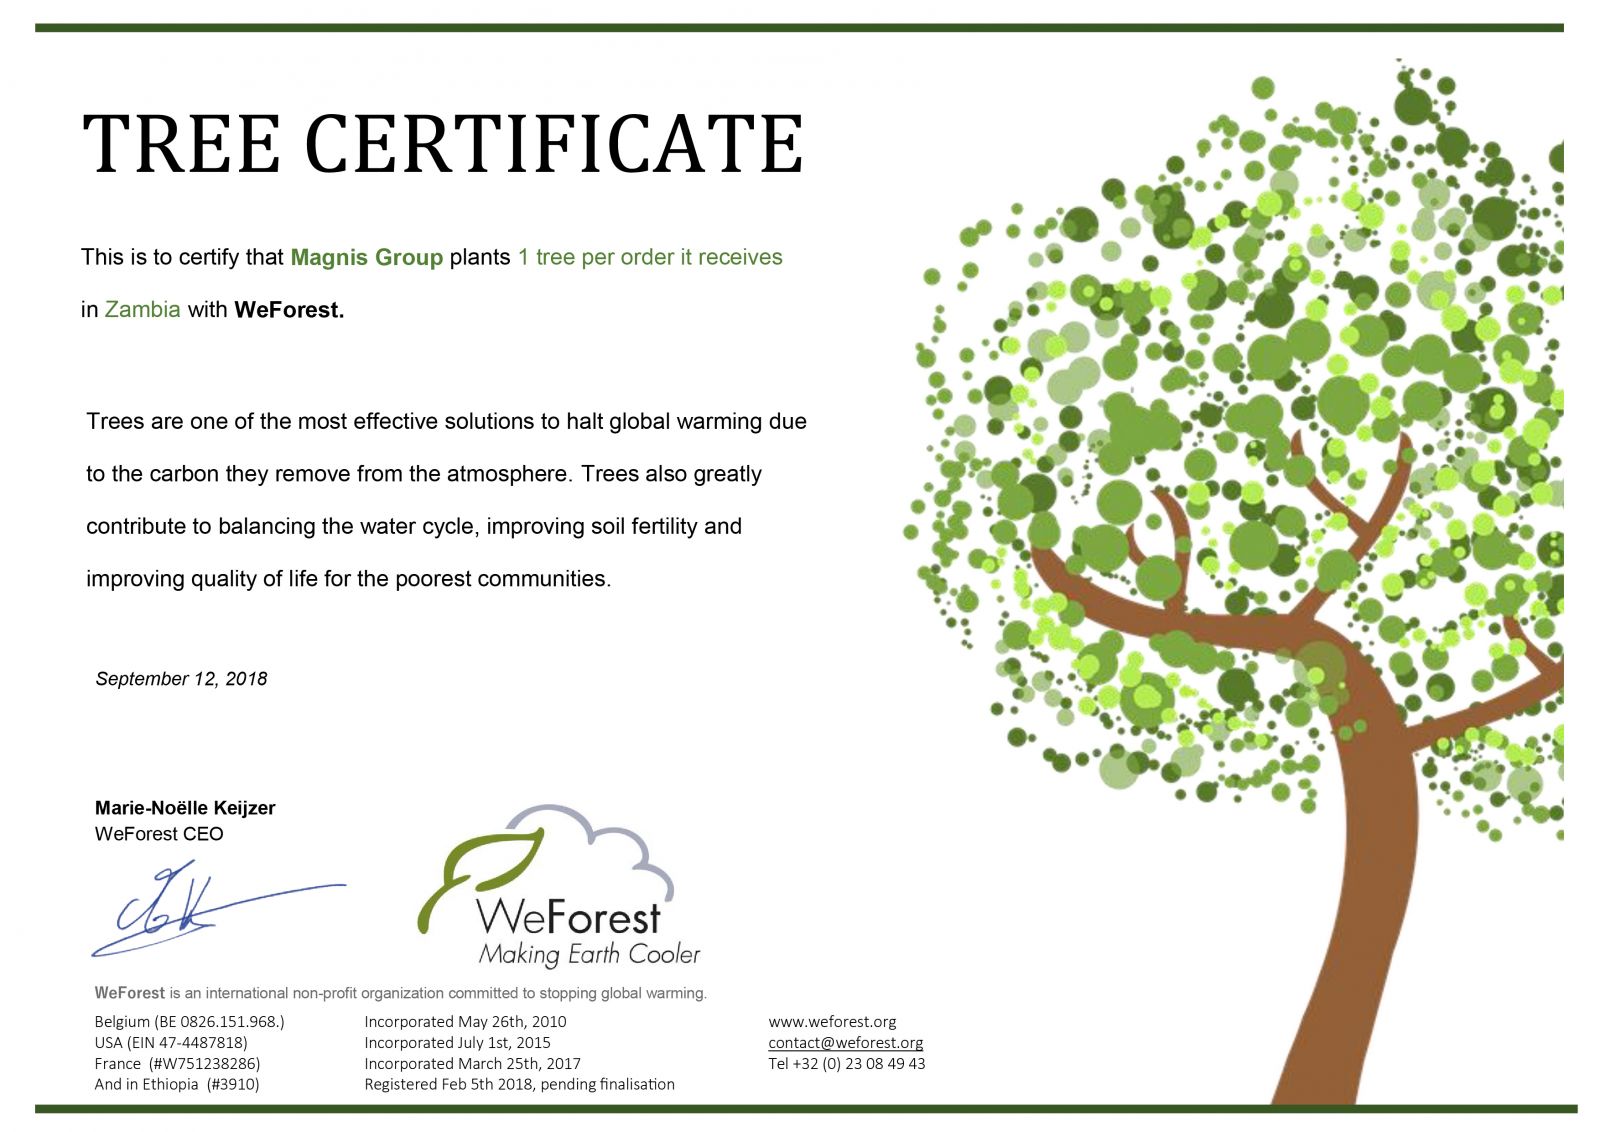 Our WeForest certificate